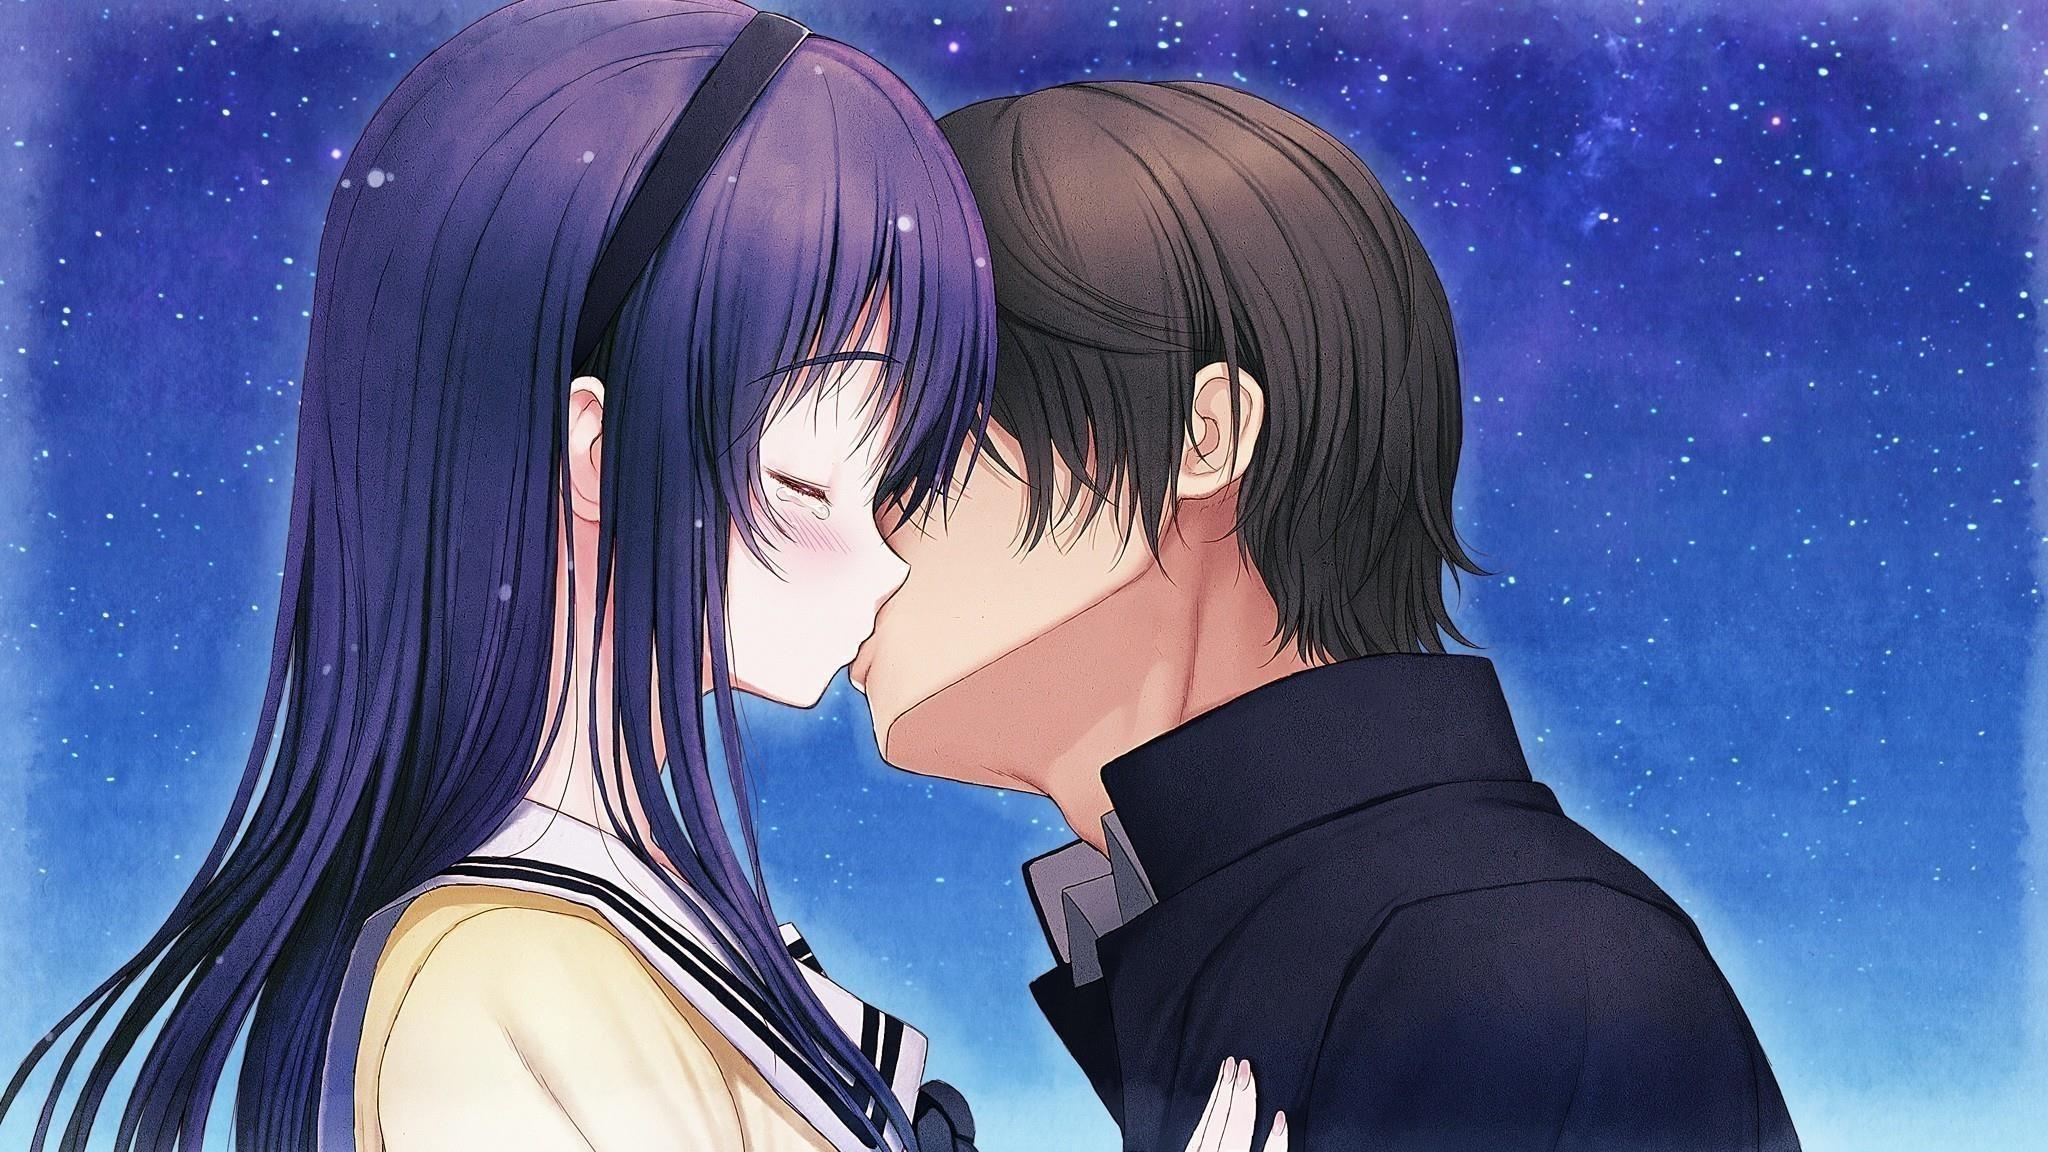 Cute Anime Couple Kissing Wallpapers - Wallpaper Cave